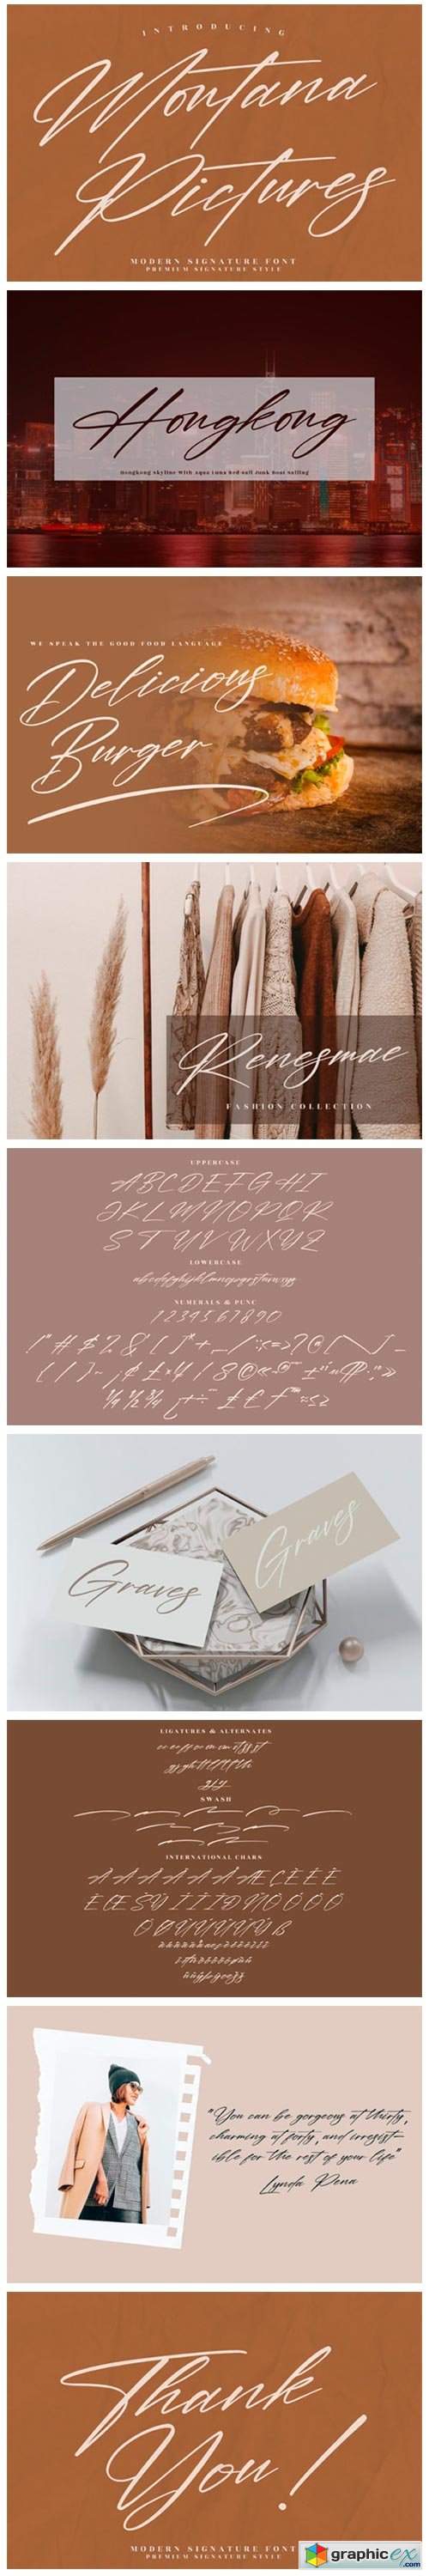  Montana Pictures Font 